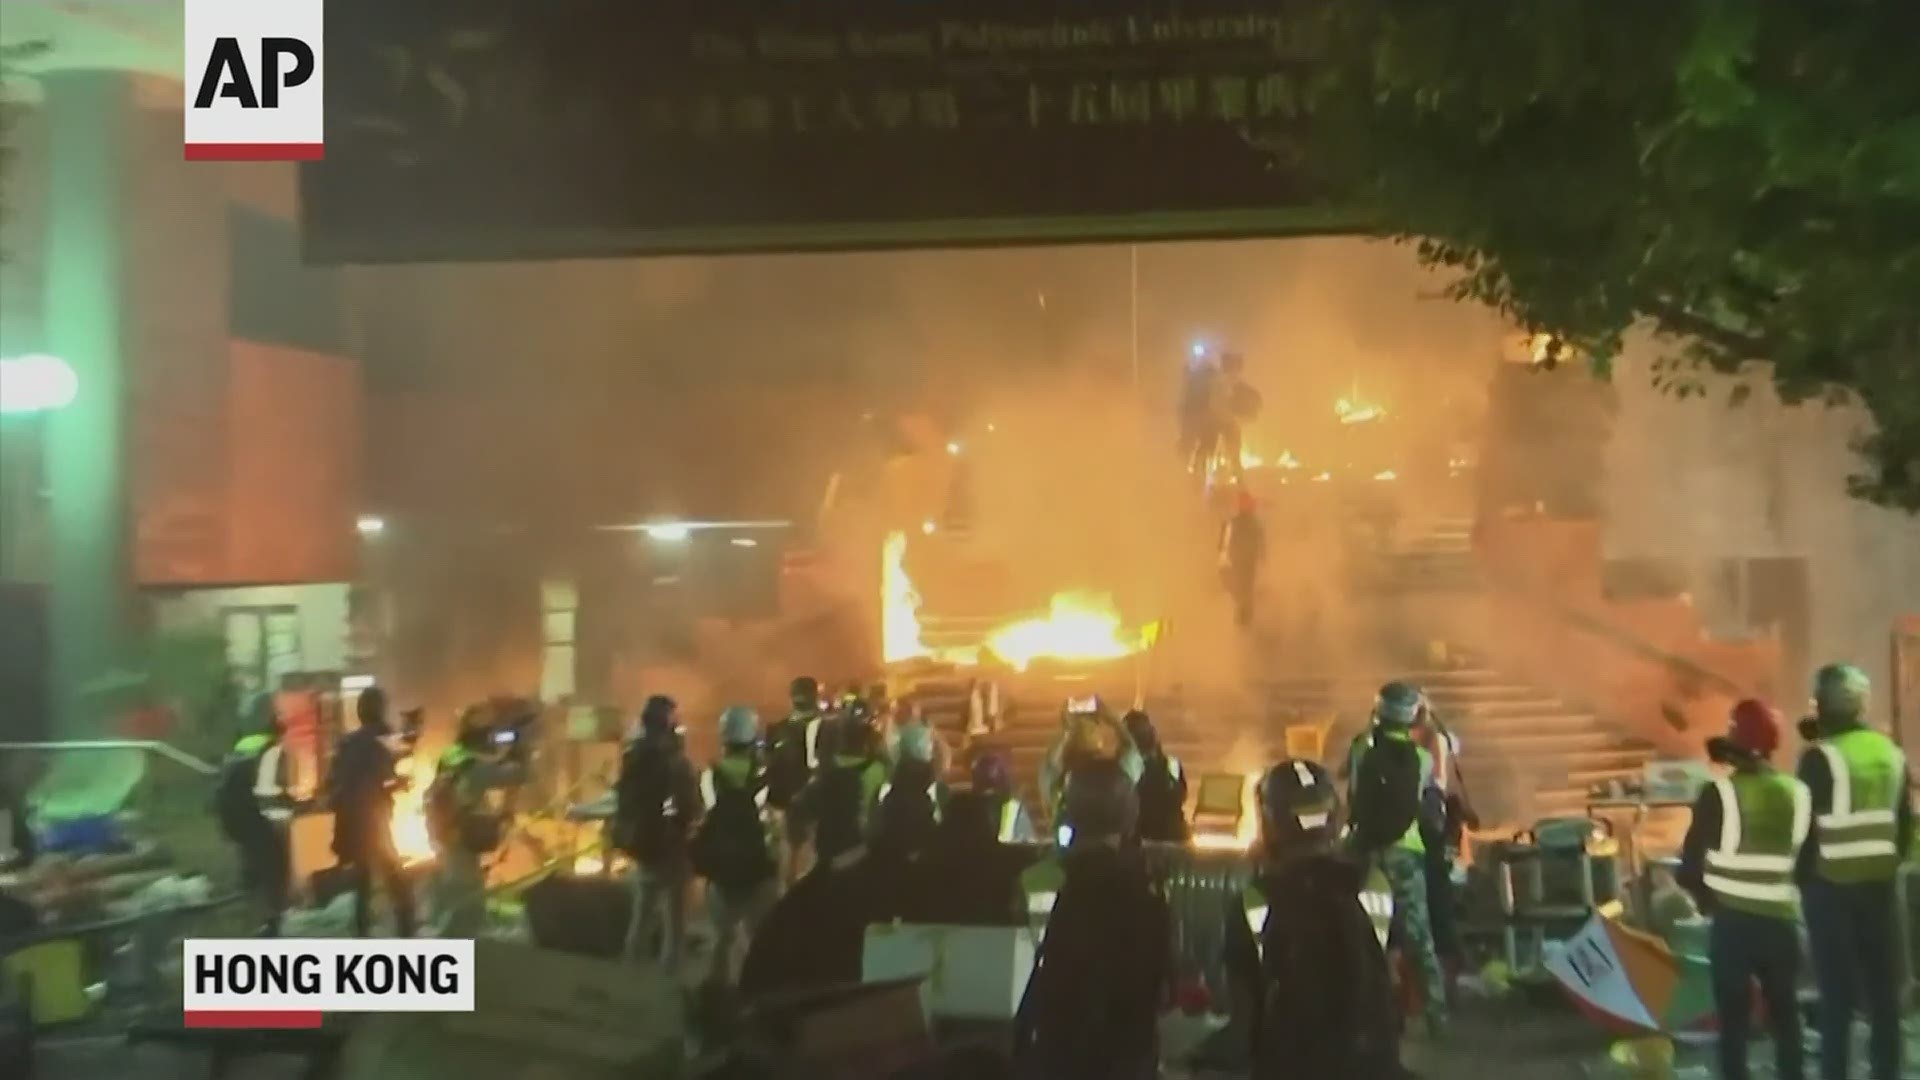 Police breached a Hong Kong university campus held by protesters early Monday after an all-night siege that included firing tear gas and water cannons.